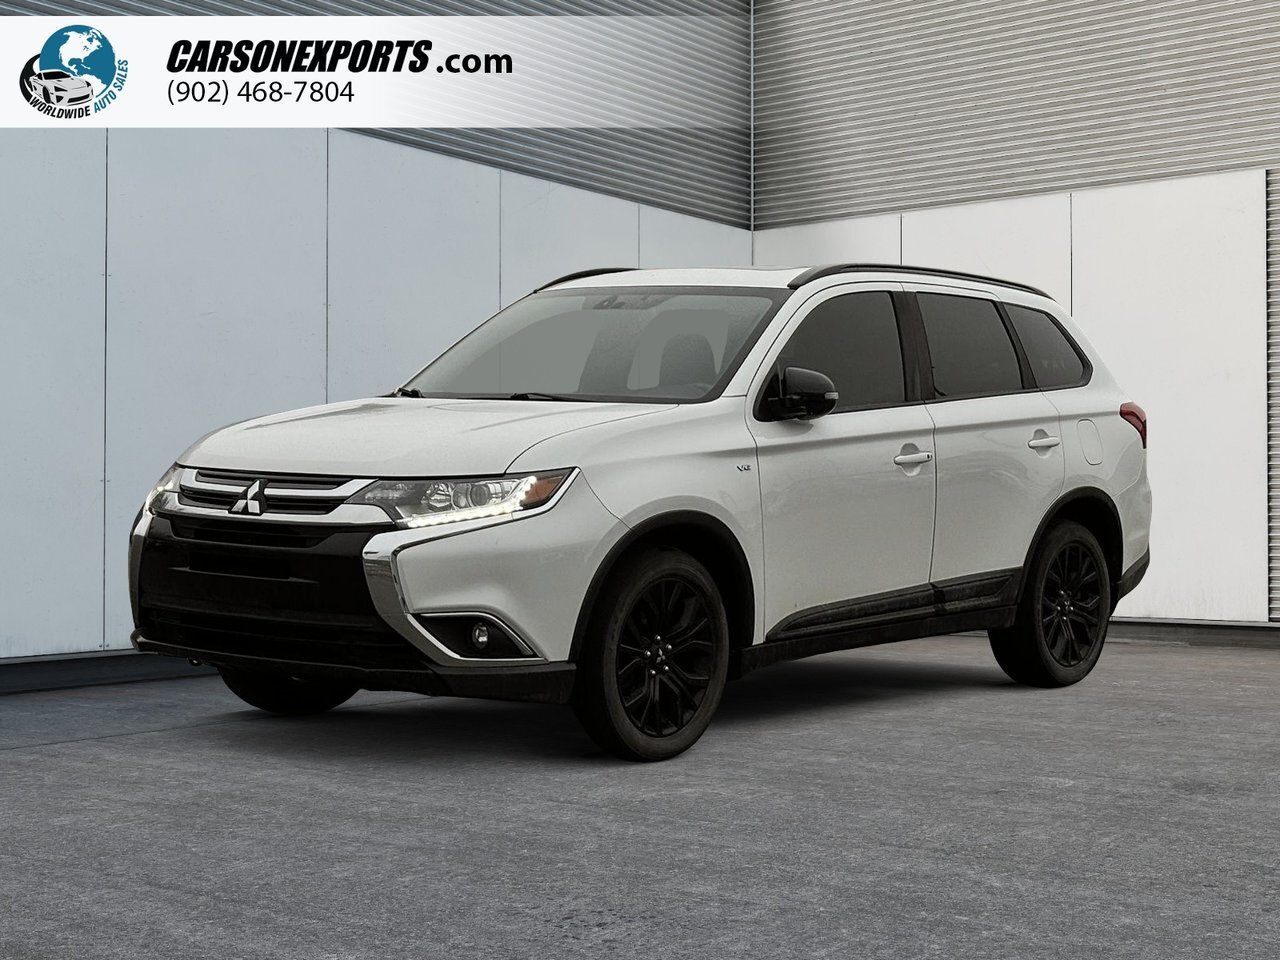 2018 Mitsubishi Outlander SE The best place to buy a used car. Period.